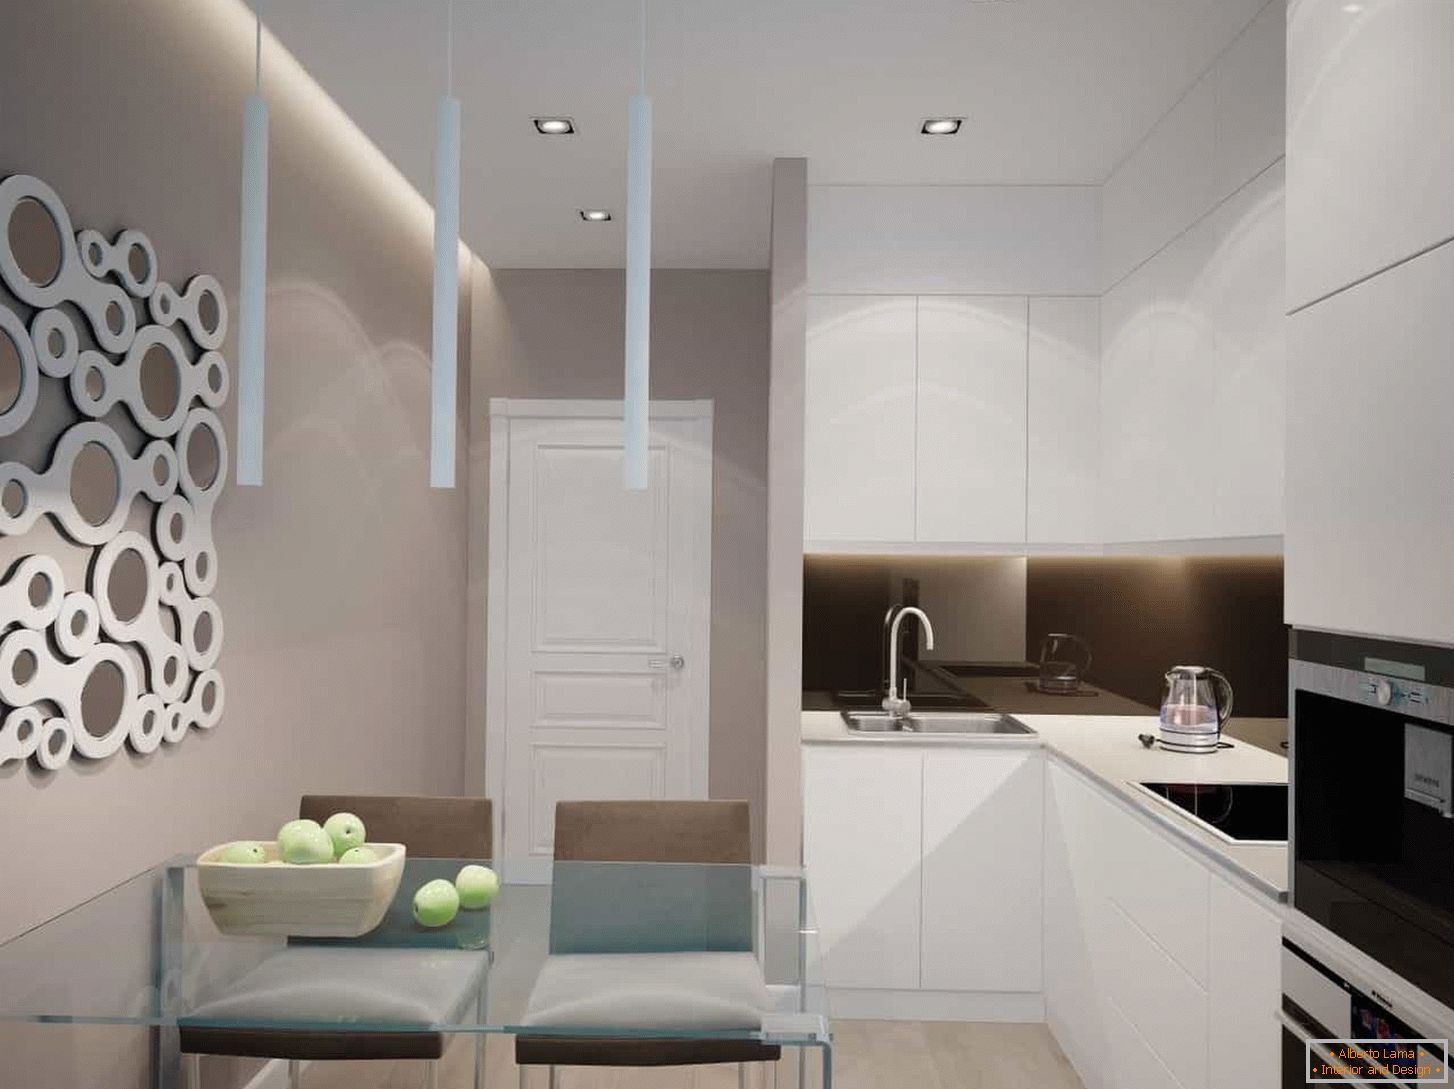 Kitchen white in modern style with built-in appliances